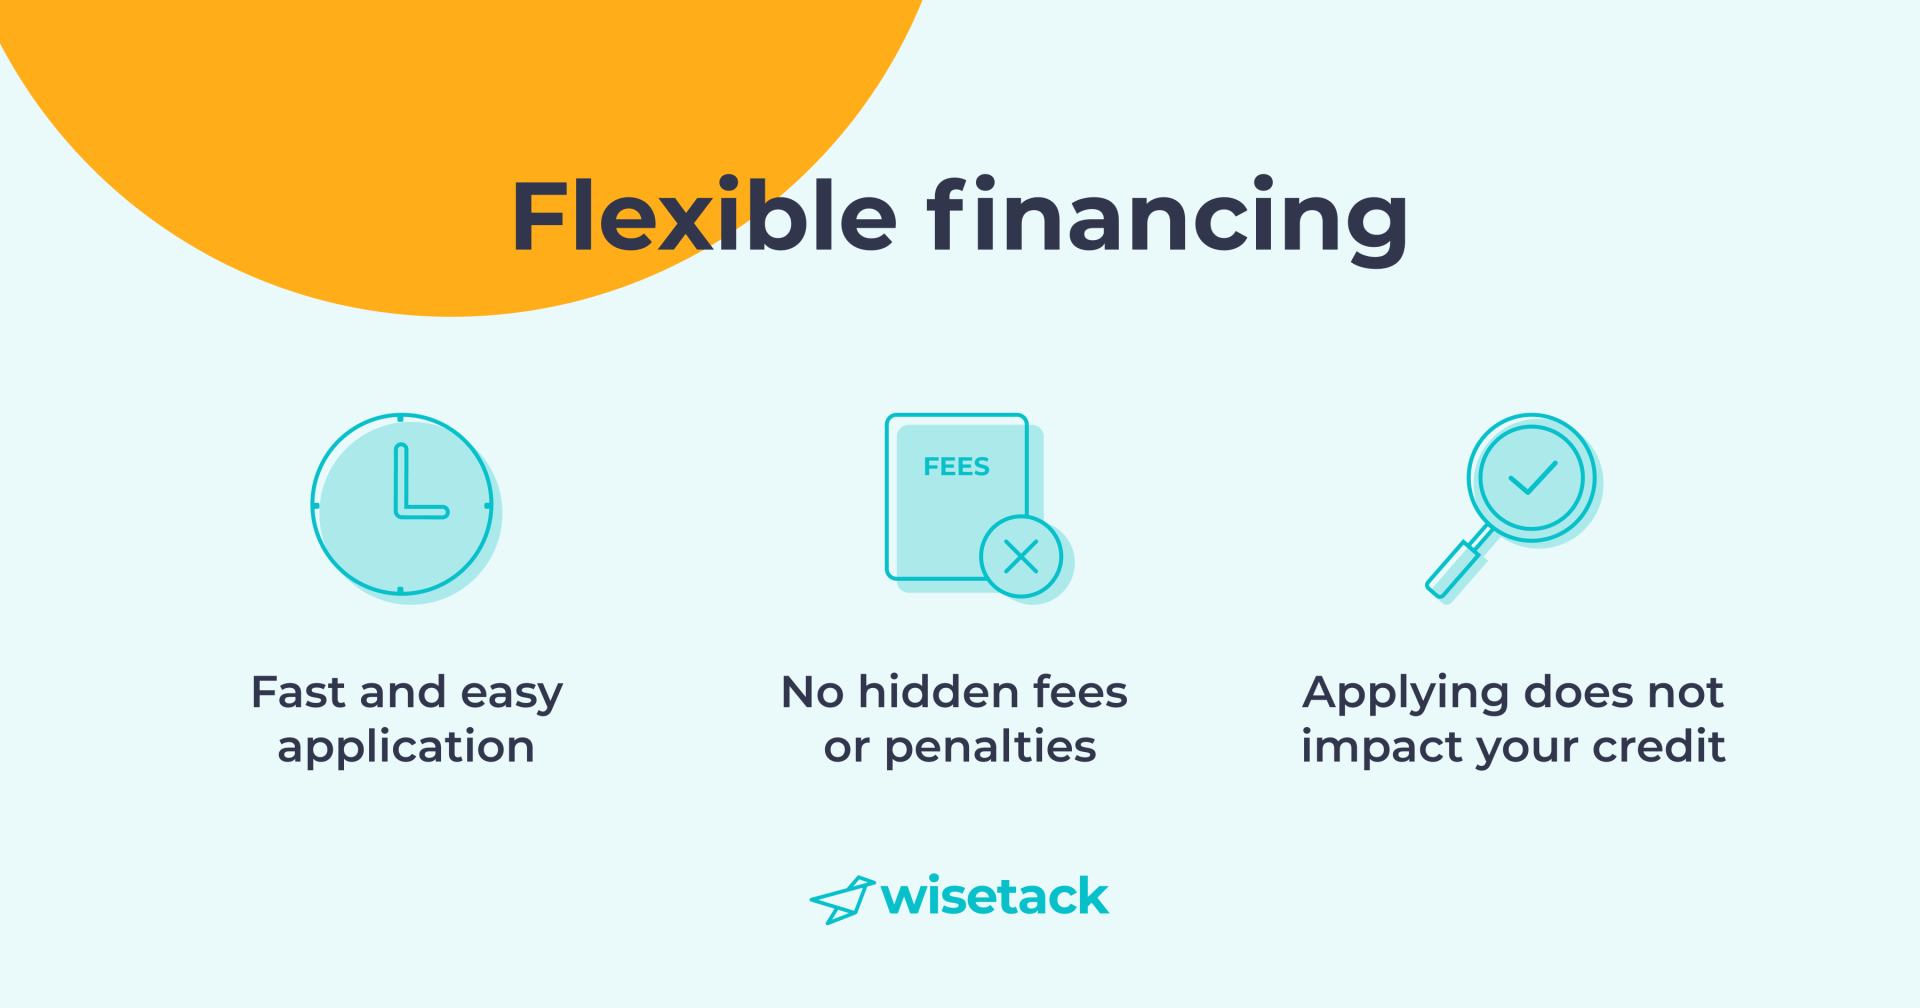 Flexible financing - Fast and easy application - No hidden fees or penalties - Applying does not impact your credit - by wisetack